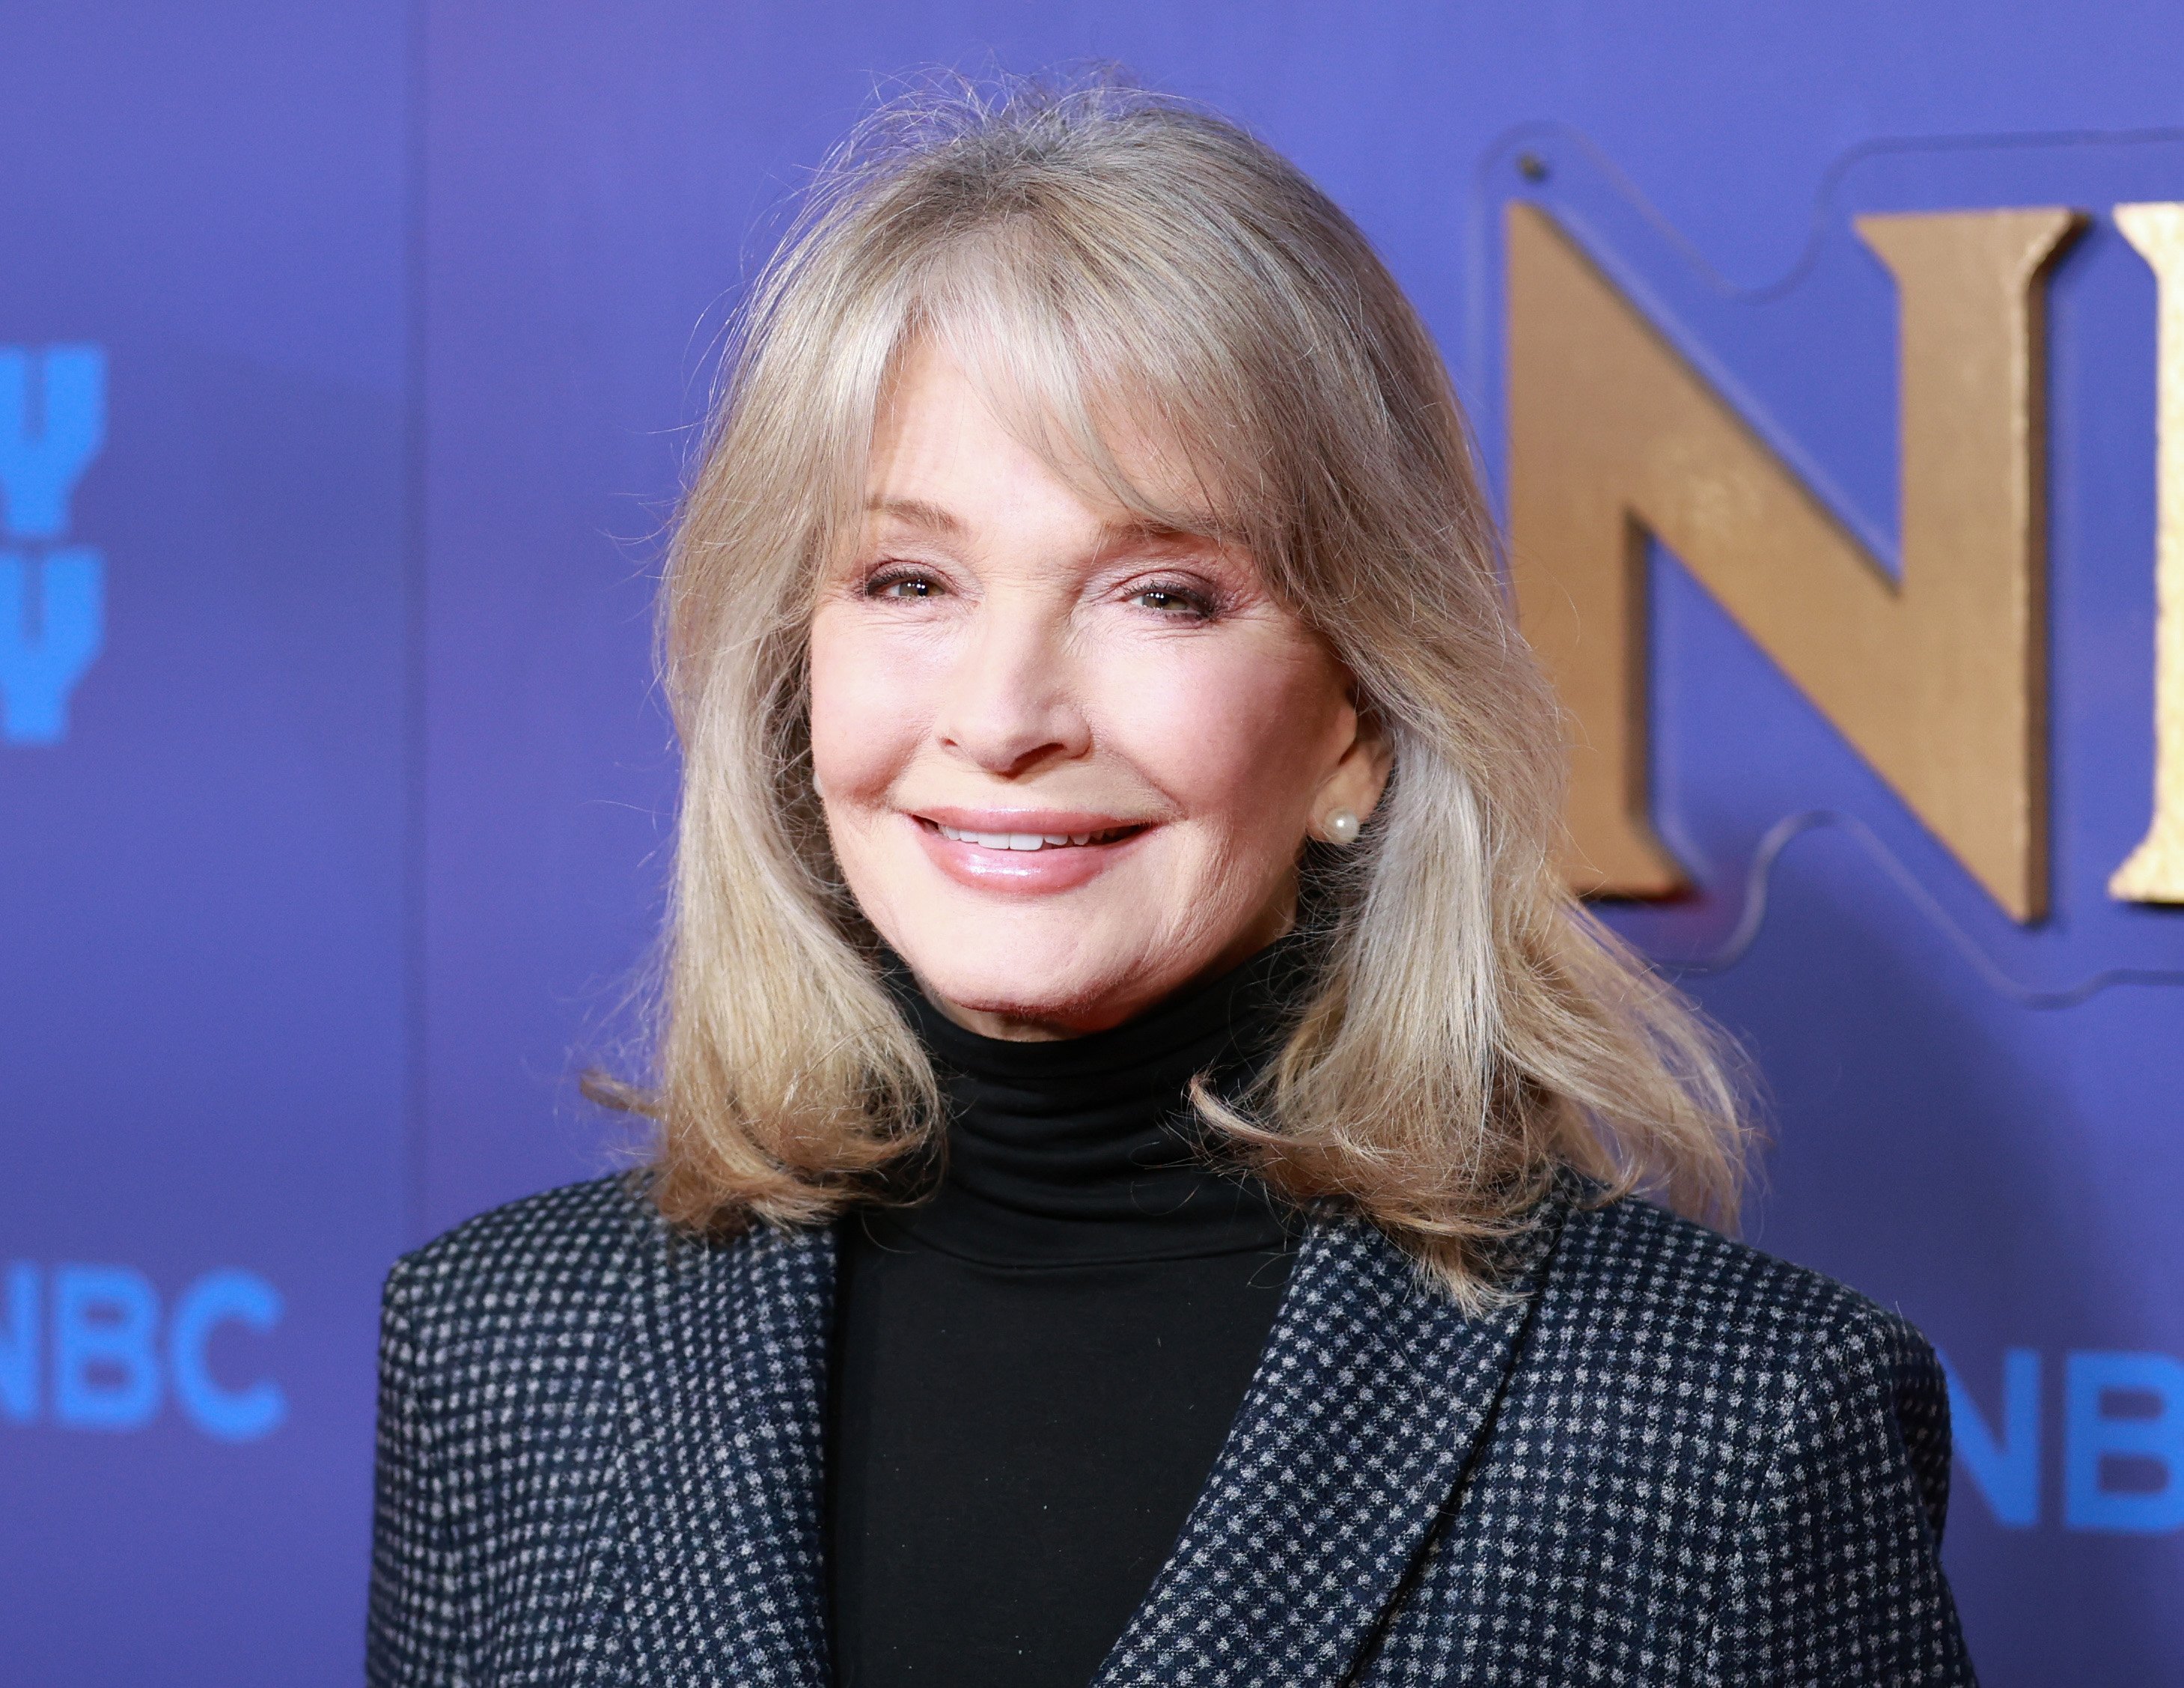 Deidre Hall attends the 2023 NBC Universal TCA Winter Press Tour at The Langham Huntington, Pasadena on January 15, 2023 in Pasadena, California ┃Source: Getty Images